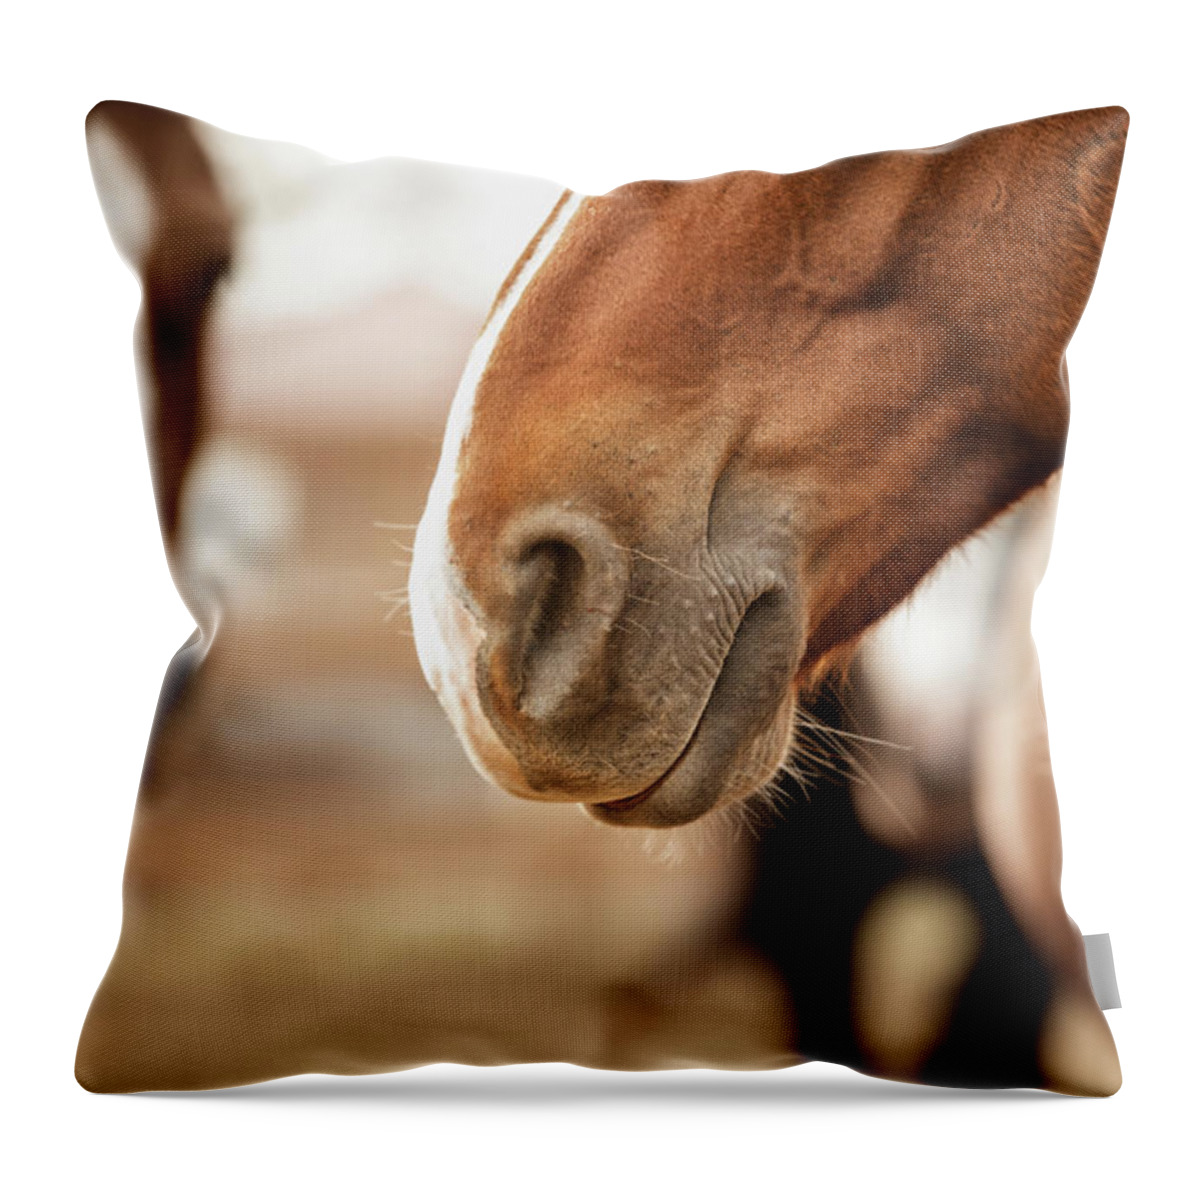 Horse Throw Pillow featuring the photograph The Nose Knows by Ryan Courson